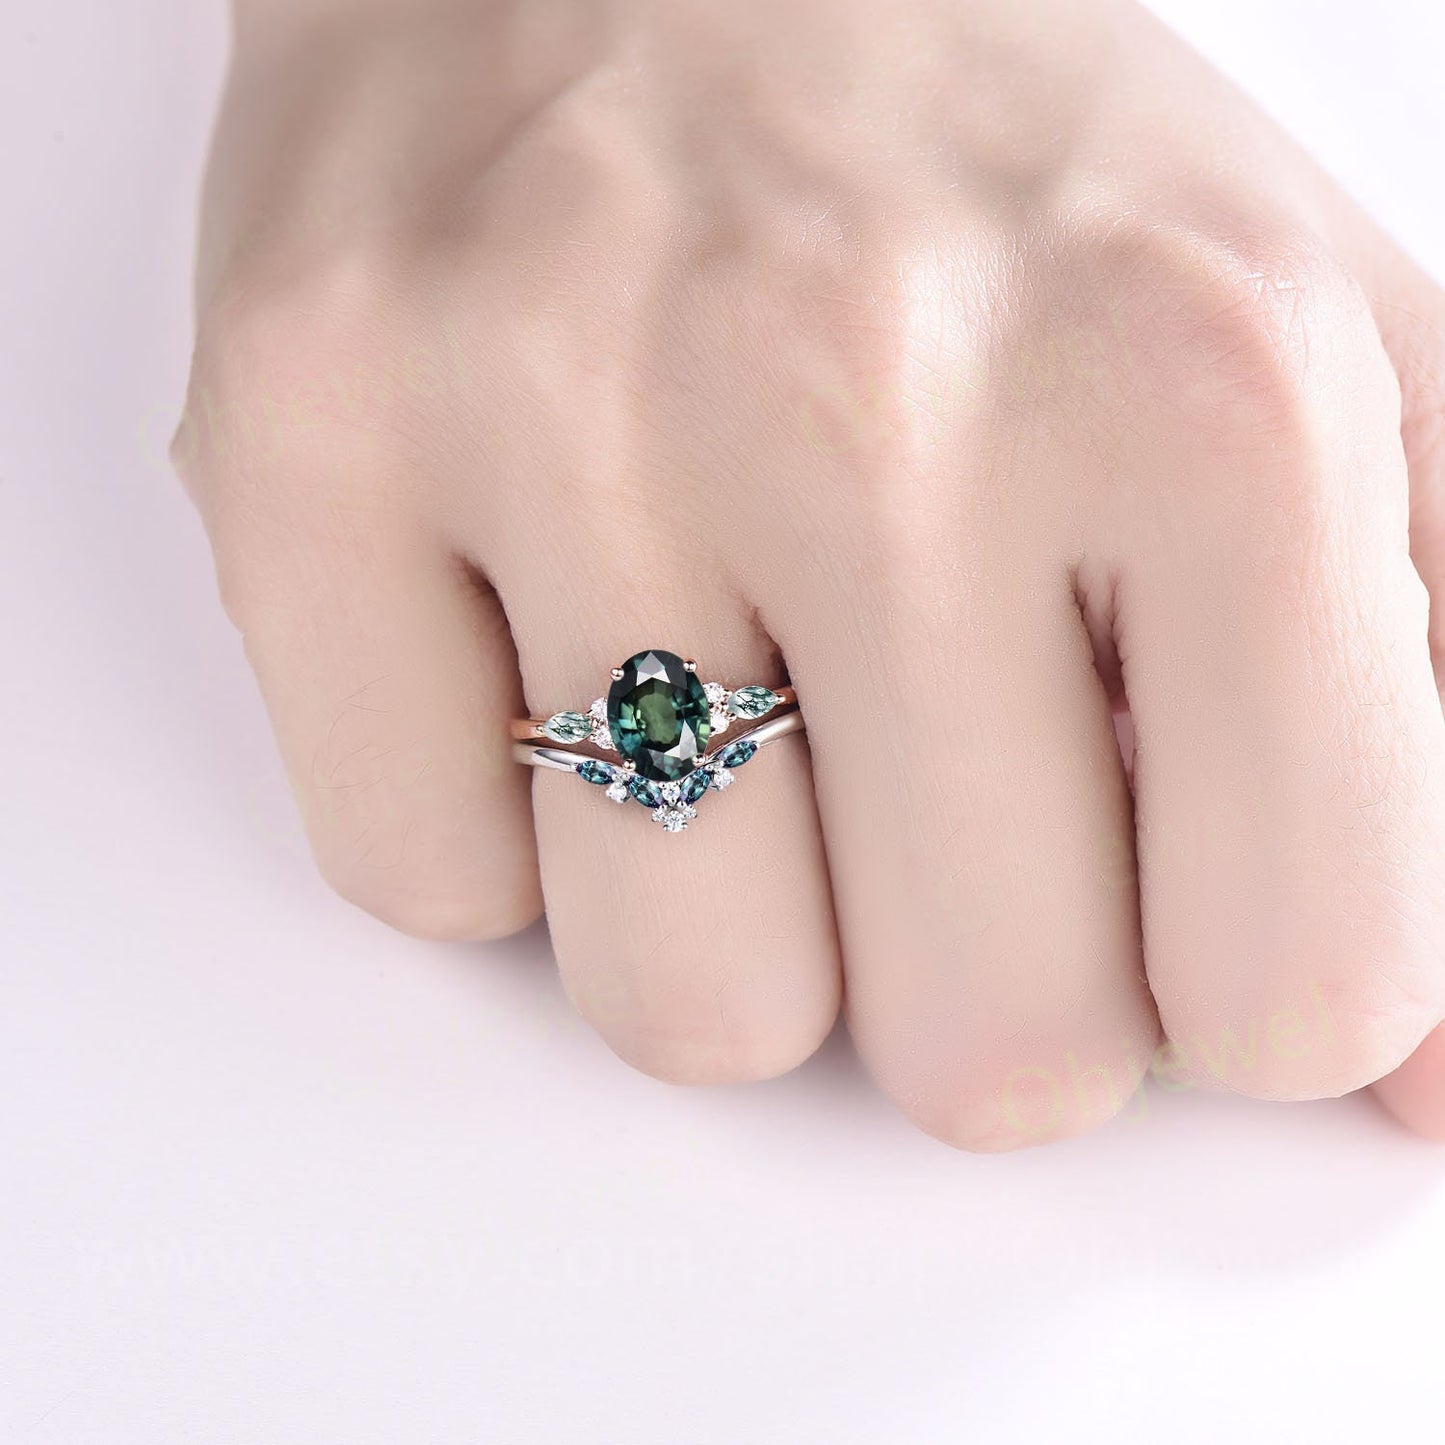 Oval natural green sapphire ring vintage teal sapphire engagement ring art deco rose gold cluster alexandrite ring wedding ring set women